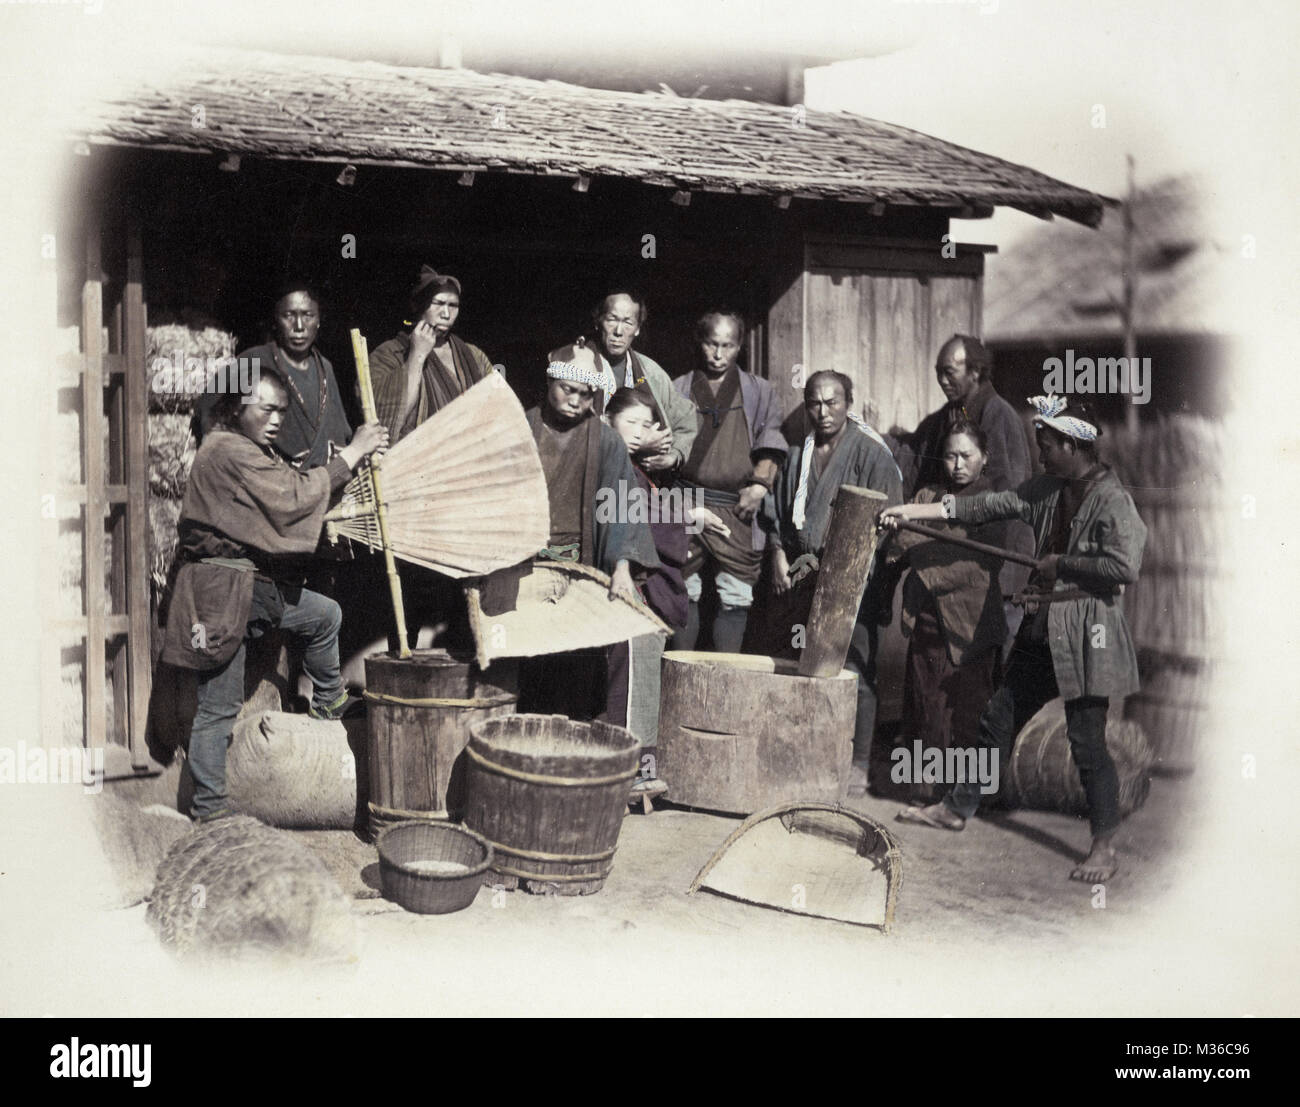 1860's Japan - portrait of a group pounding rice Stock Photo